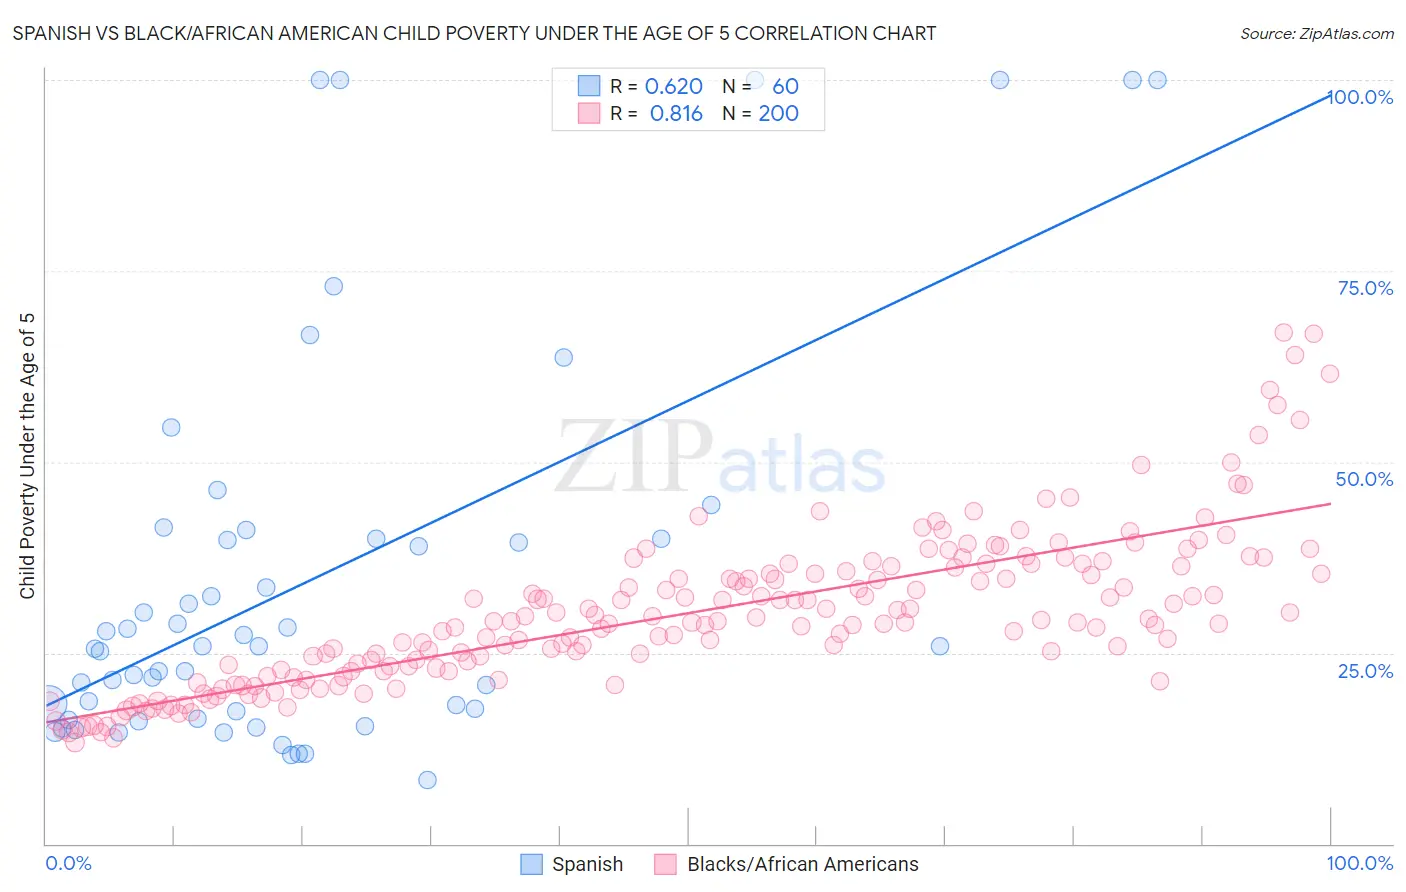 Spanish vs Black/African American Child Poverty Under the Age of 5